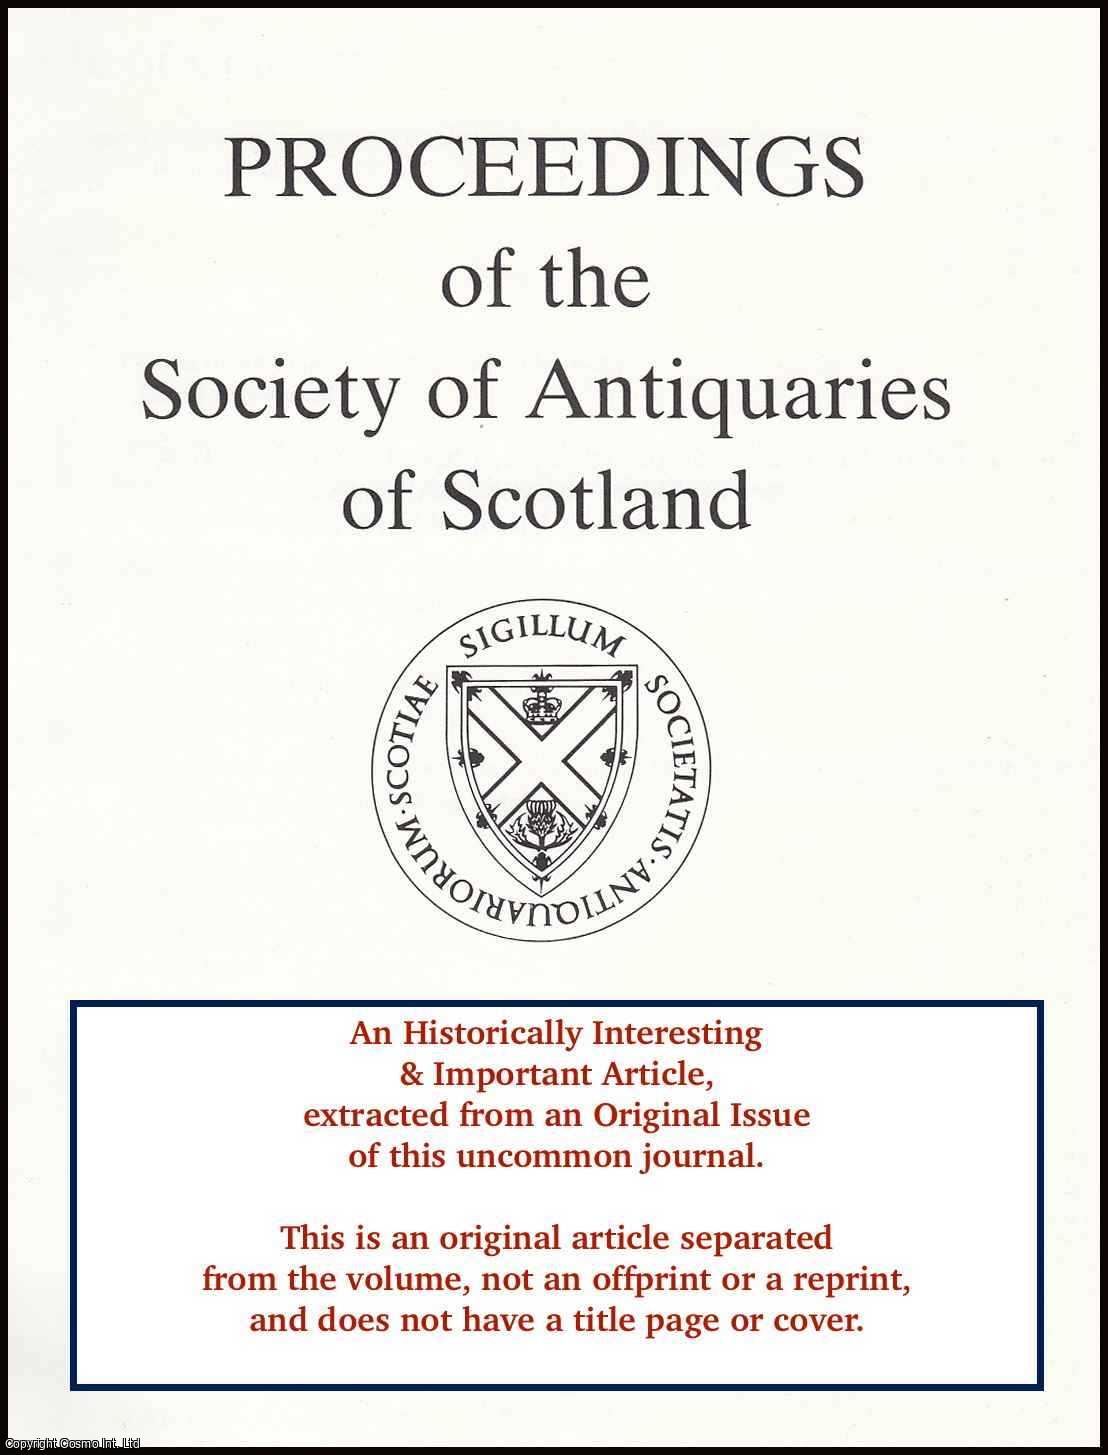 J.R. Hunter - A New Neolithic Burial Cairn in Orkney? An original article from the Proceedings of the Society of Antiquaries of Scotland, 1993.